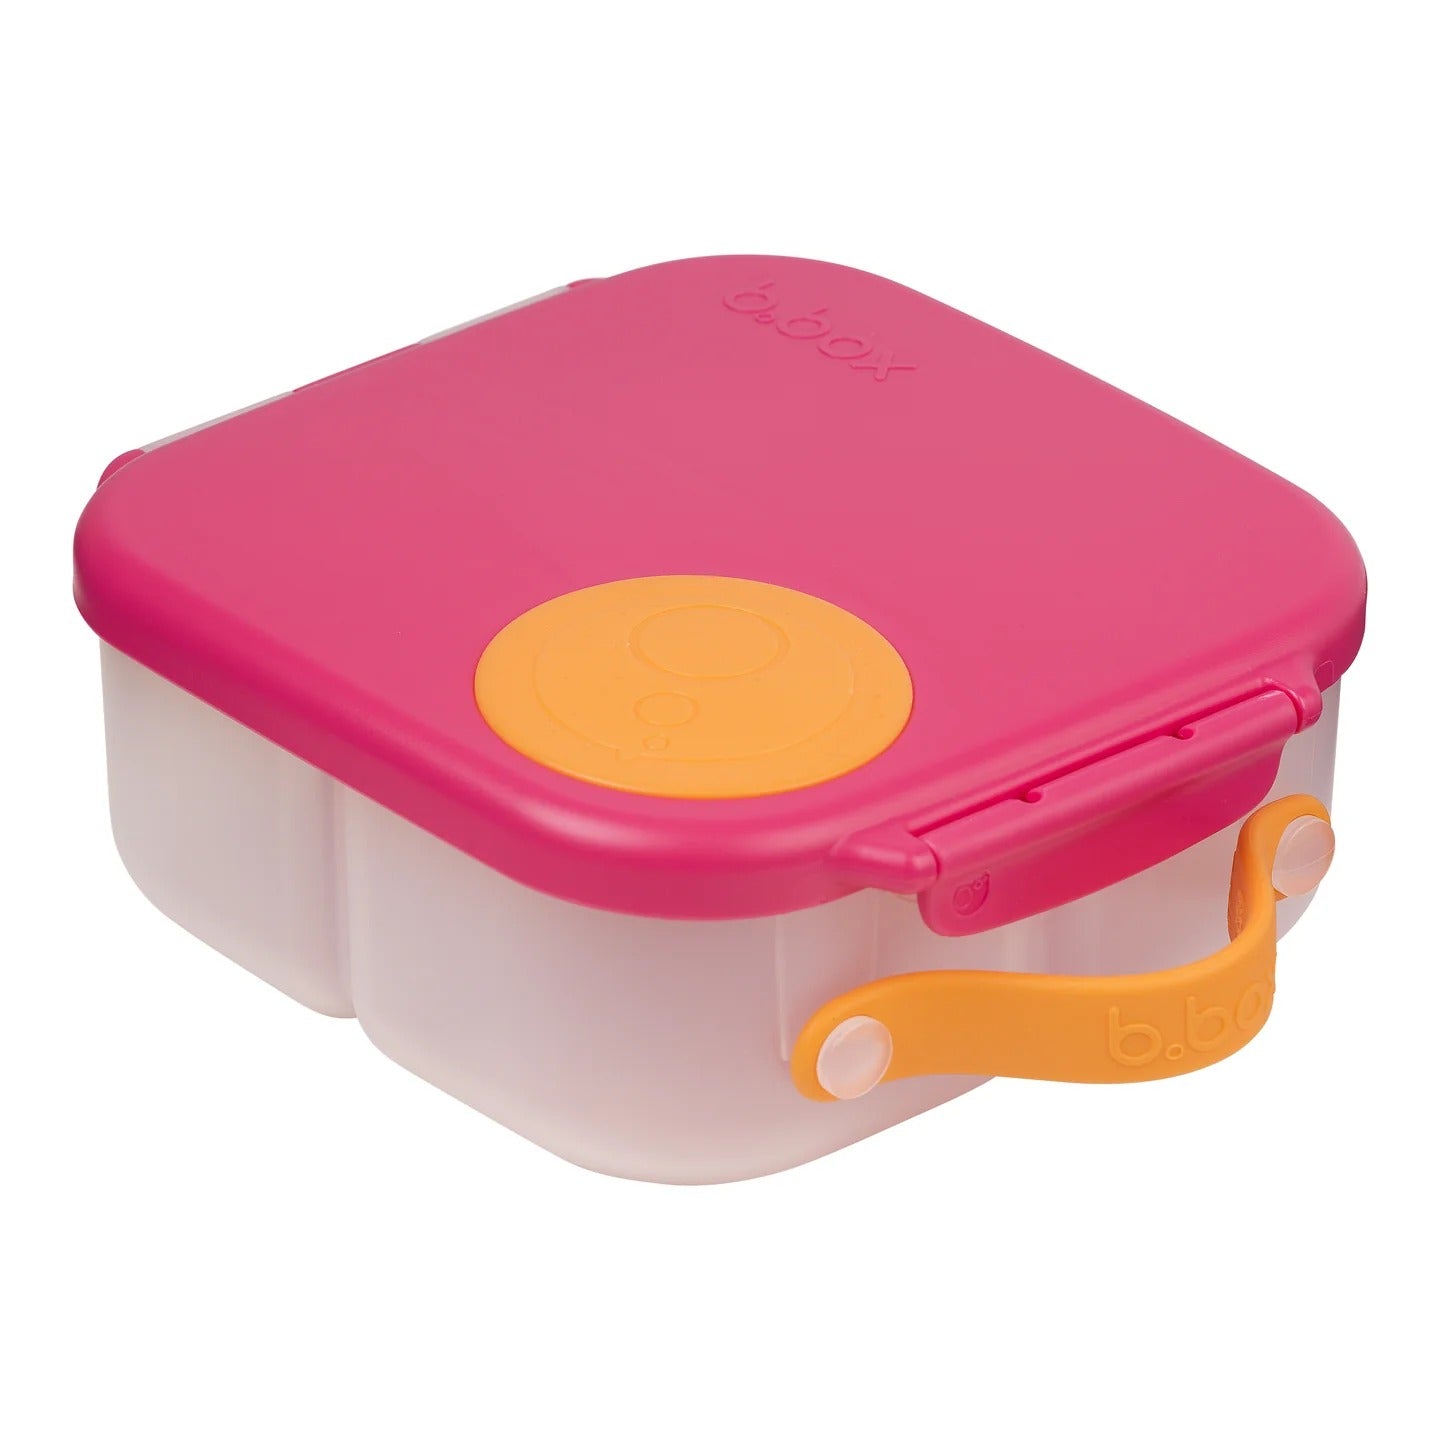 B.box Mini Lunchbox in Strawberry Shake available at Bear & Moo